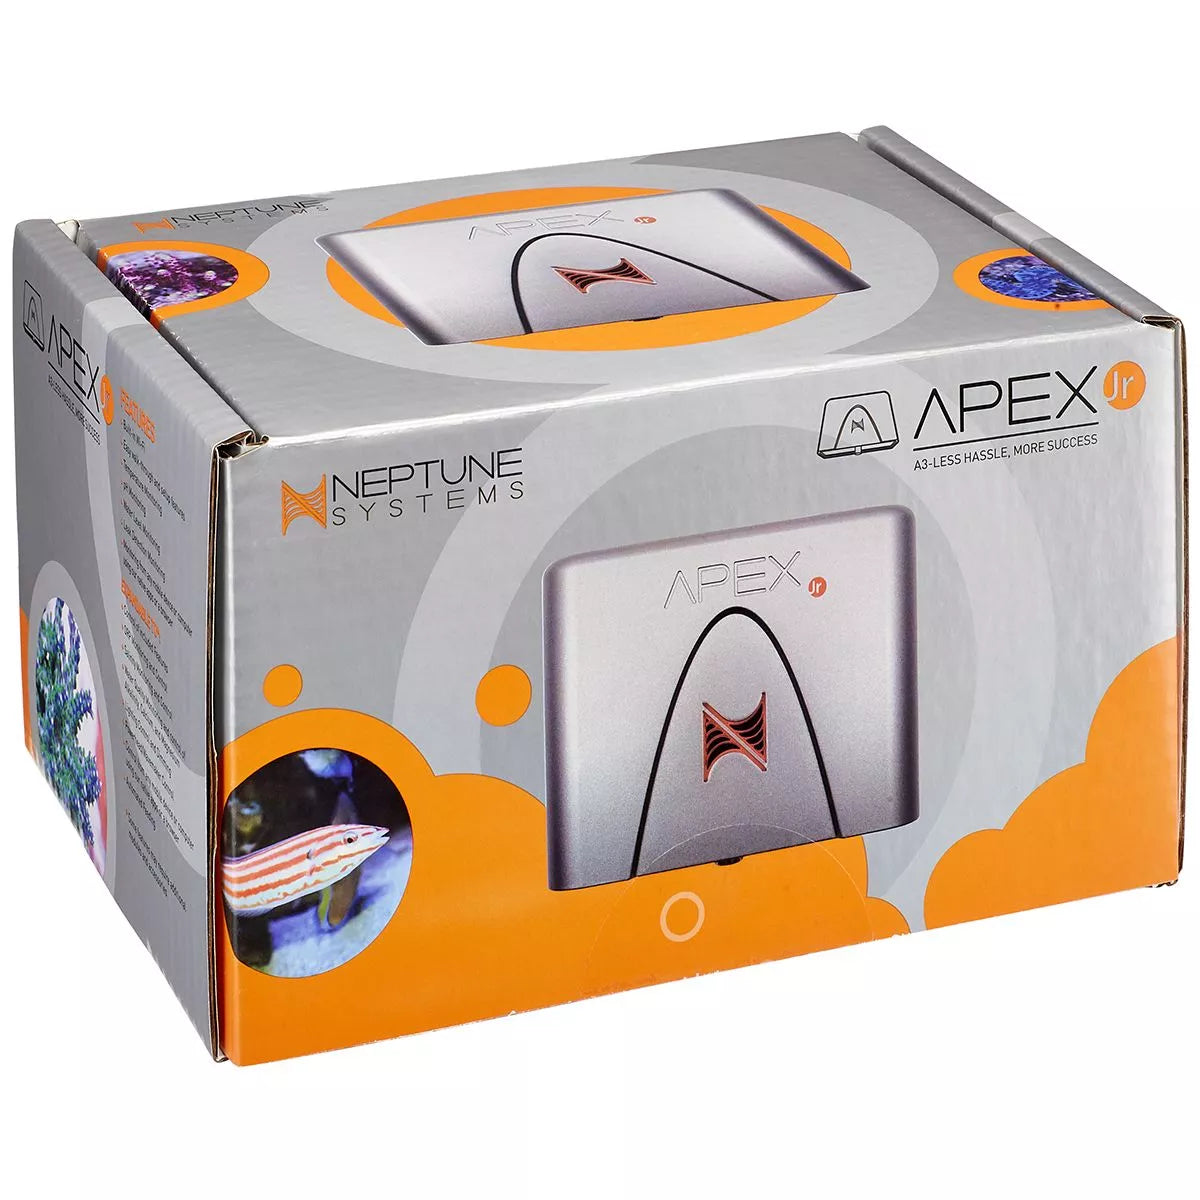 A3 Apex Jr Controller System - Neptune Systems - Neptune Systems